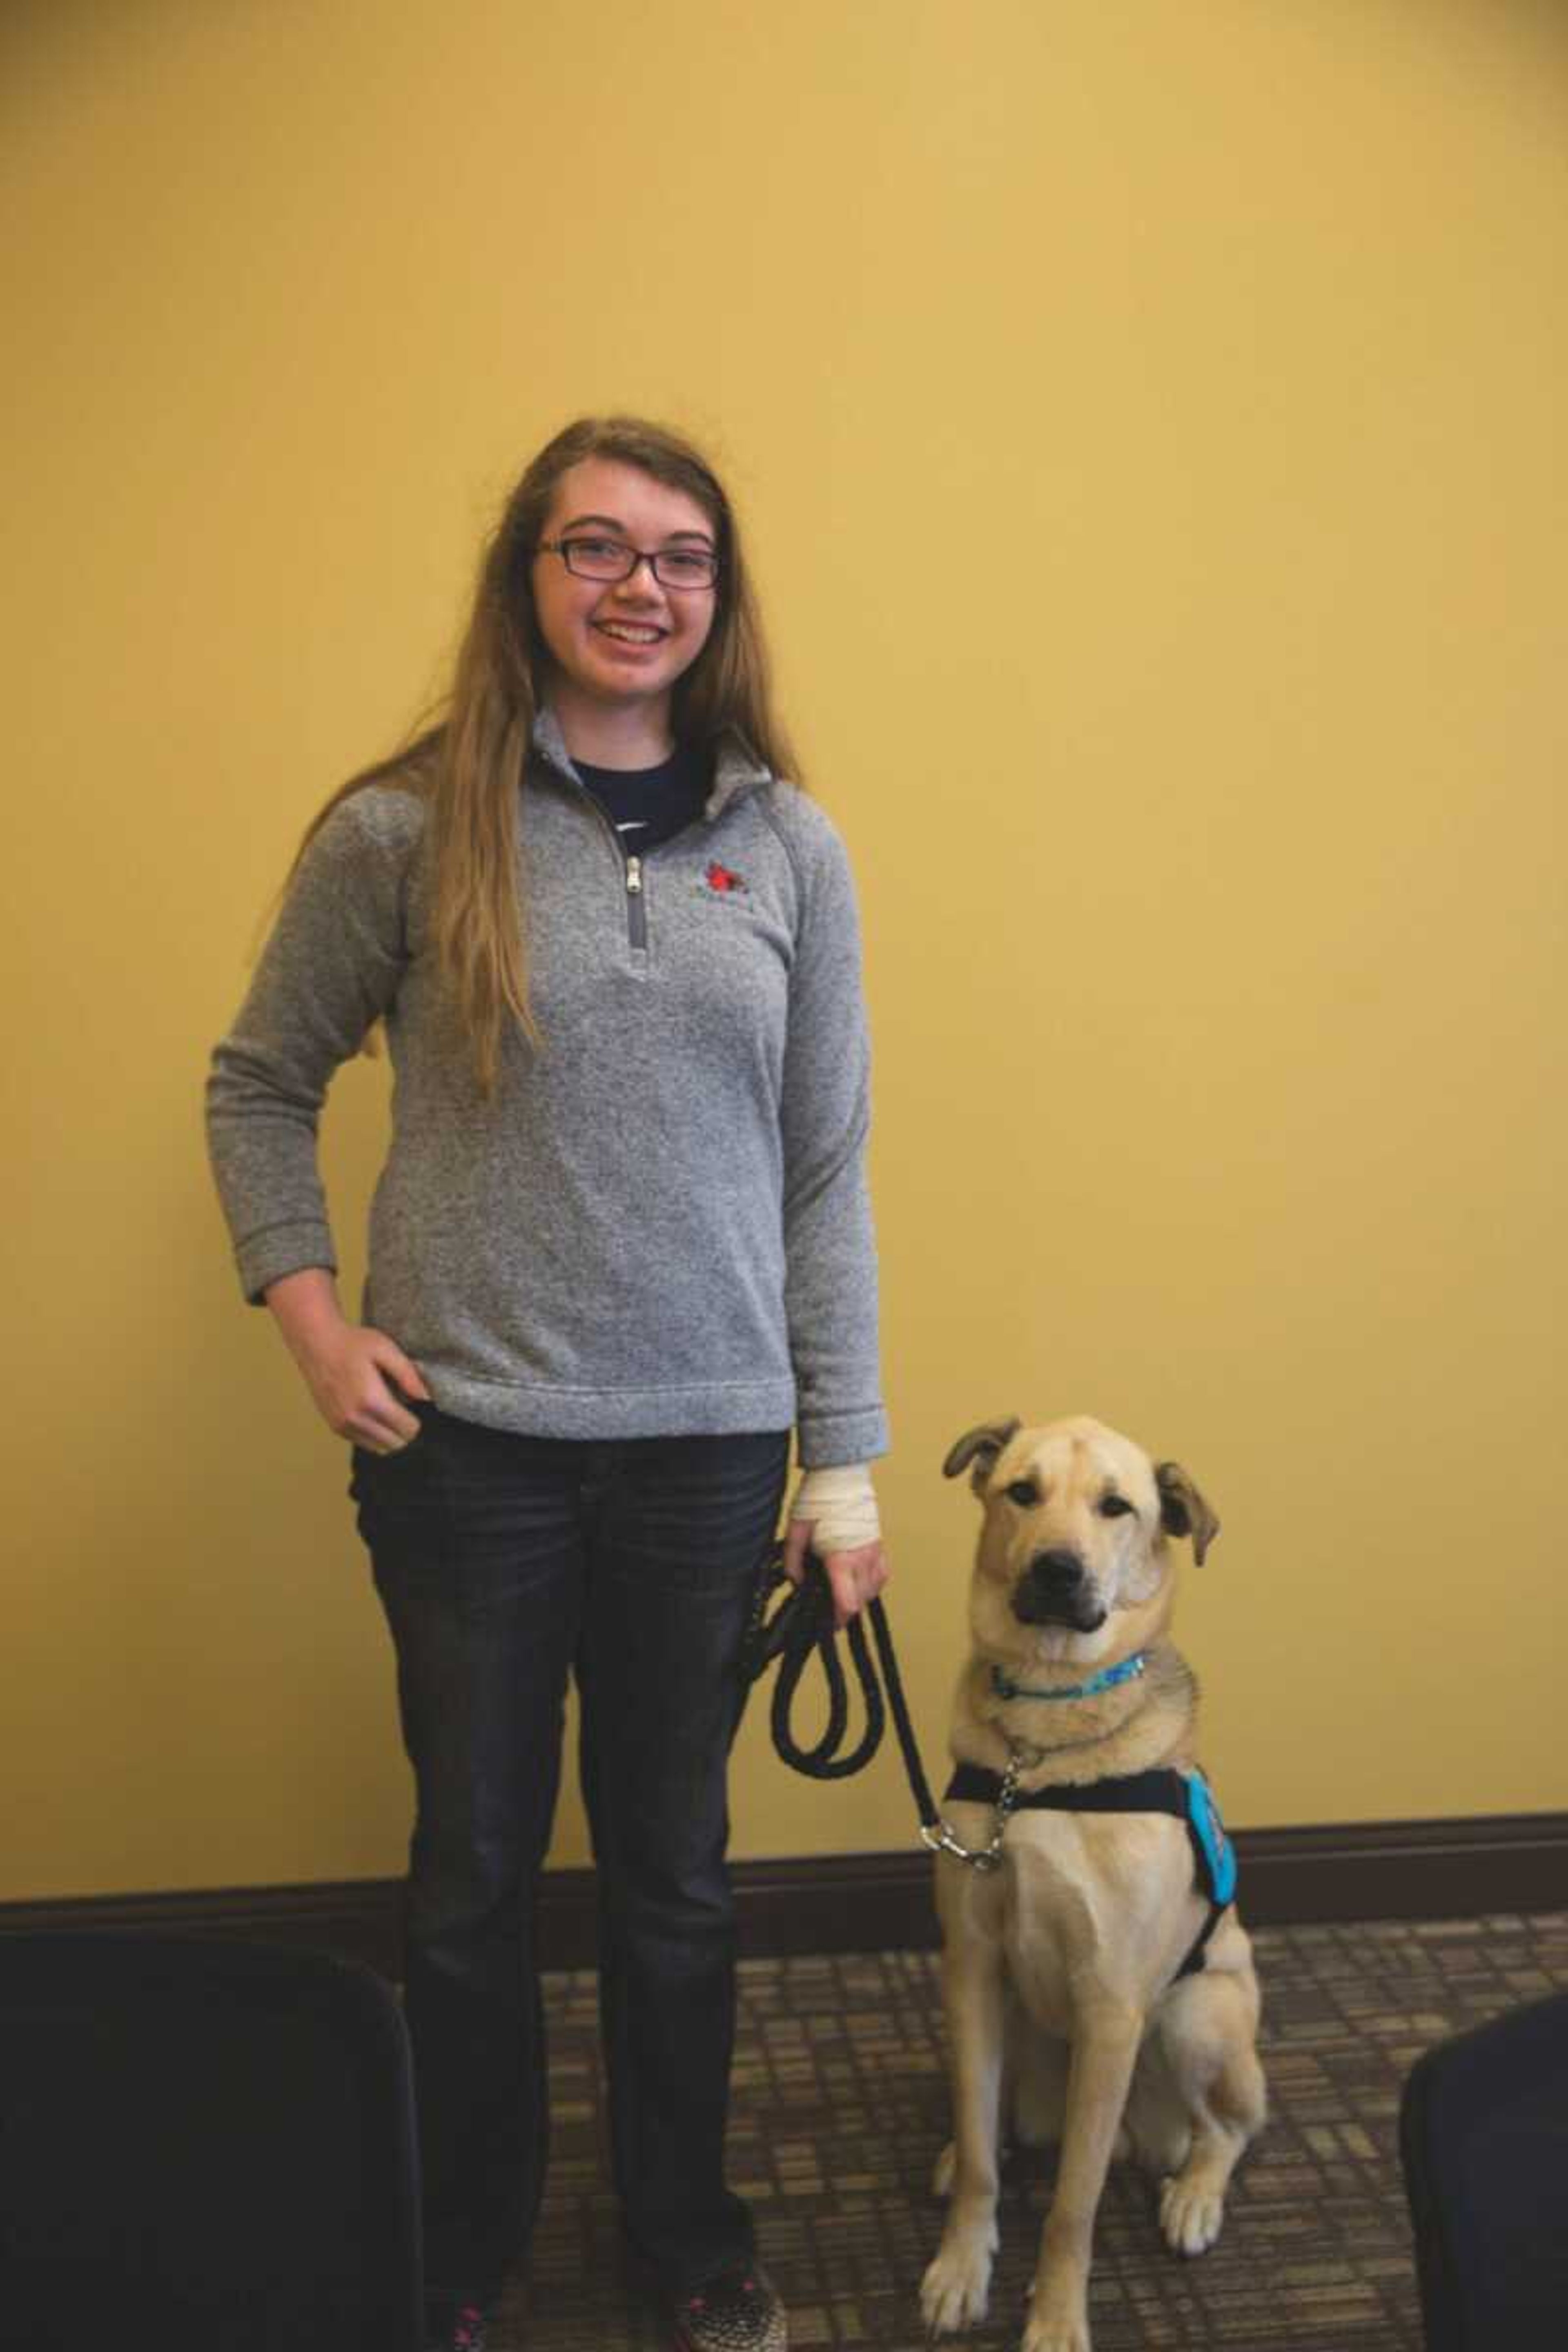 Twins take on college with service dogs